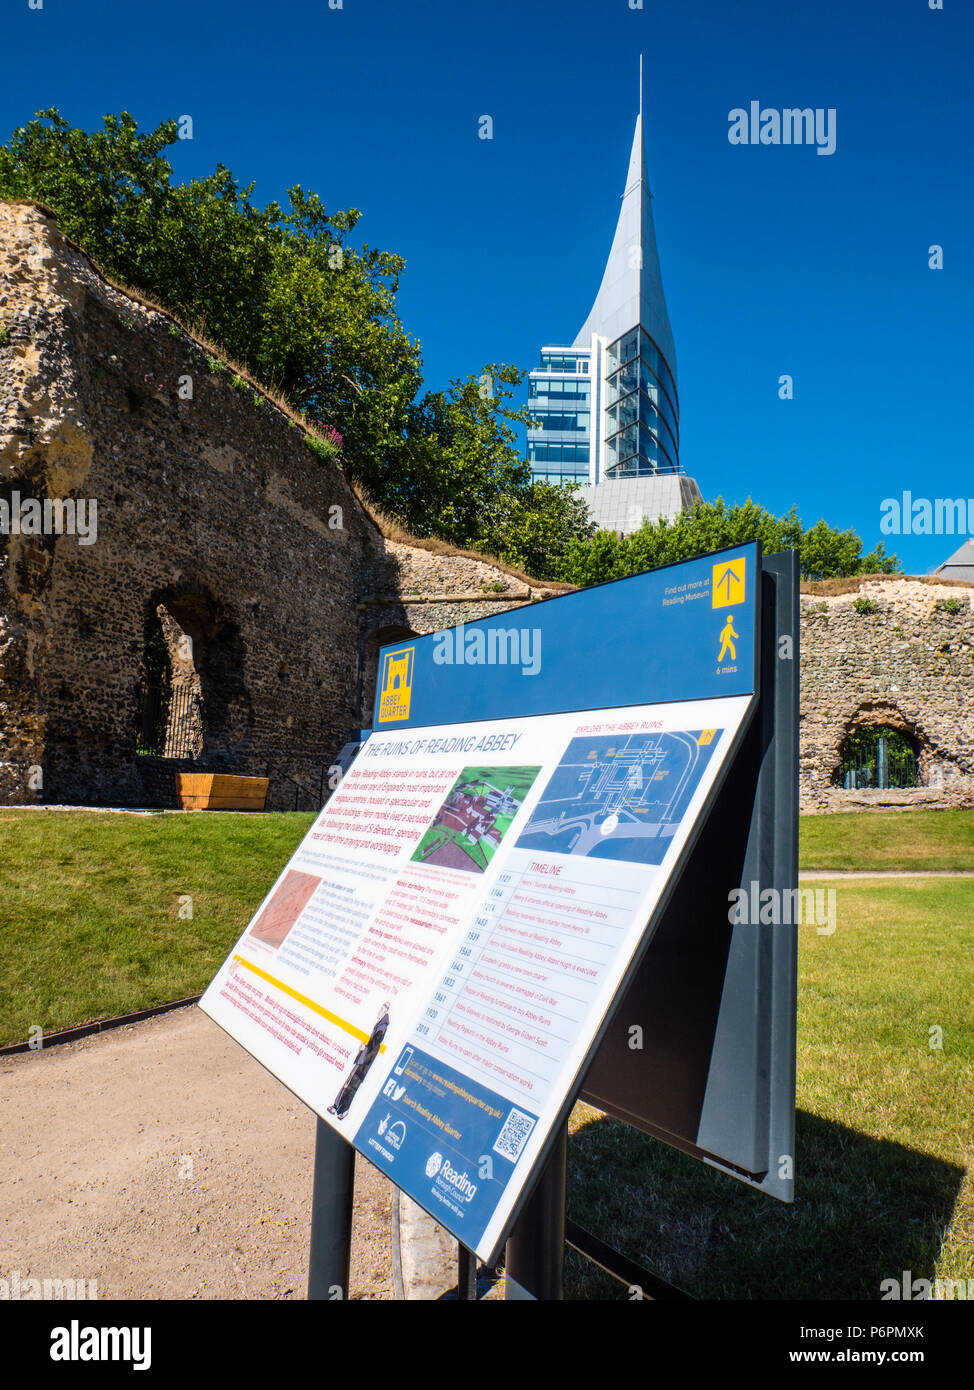 Reading Abby Ruins, Now Reopened to the Public, Reading Abby Quarter, Reading, Berkshire, England, UK, GB. Stock Photo